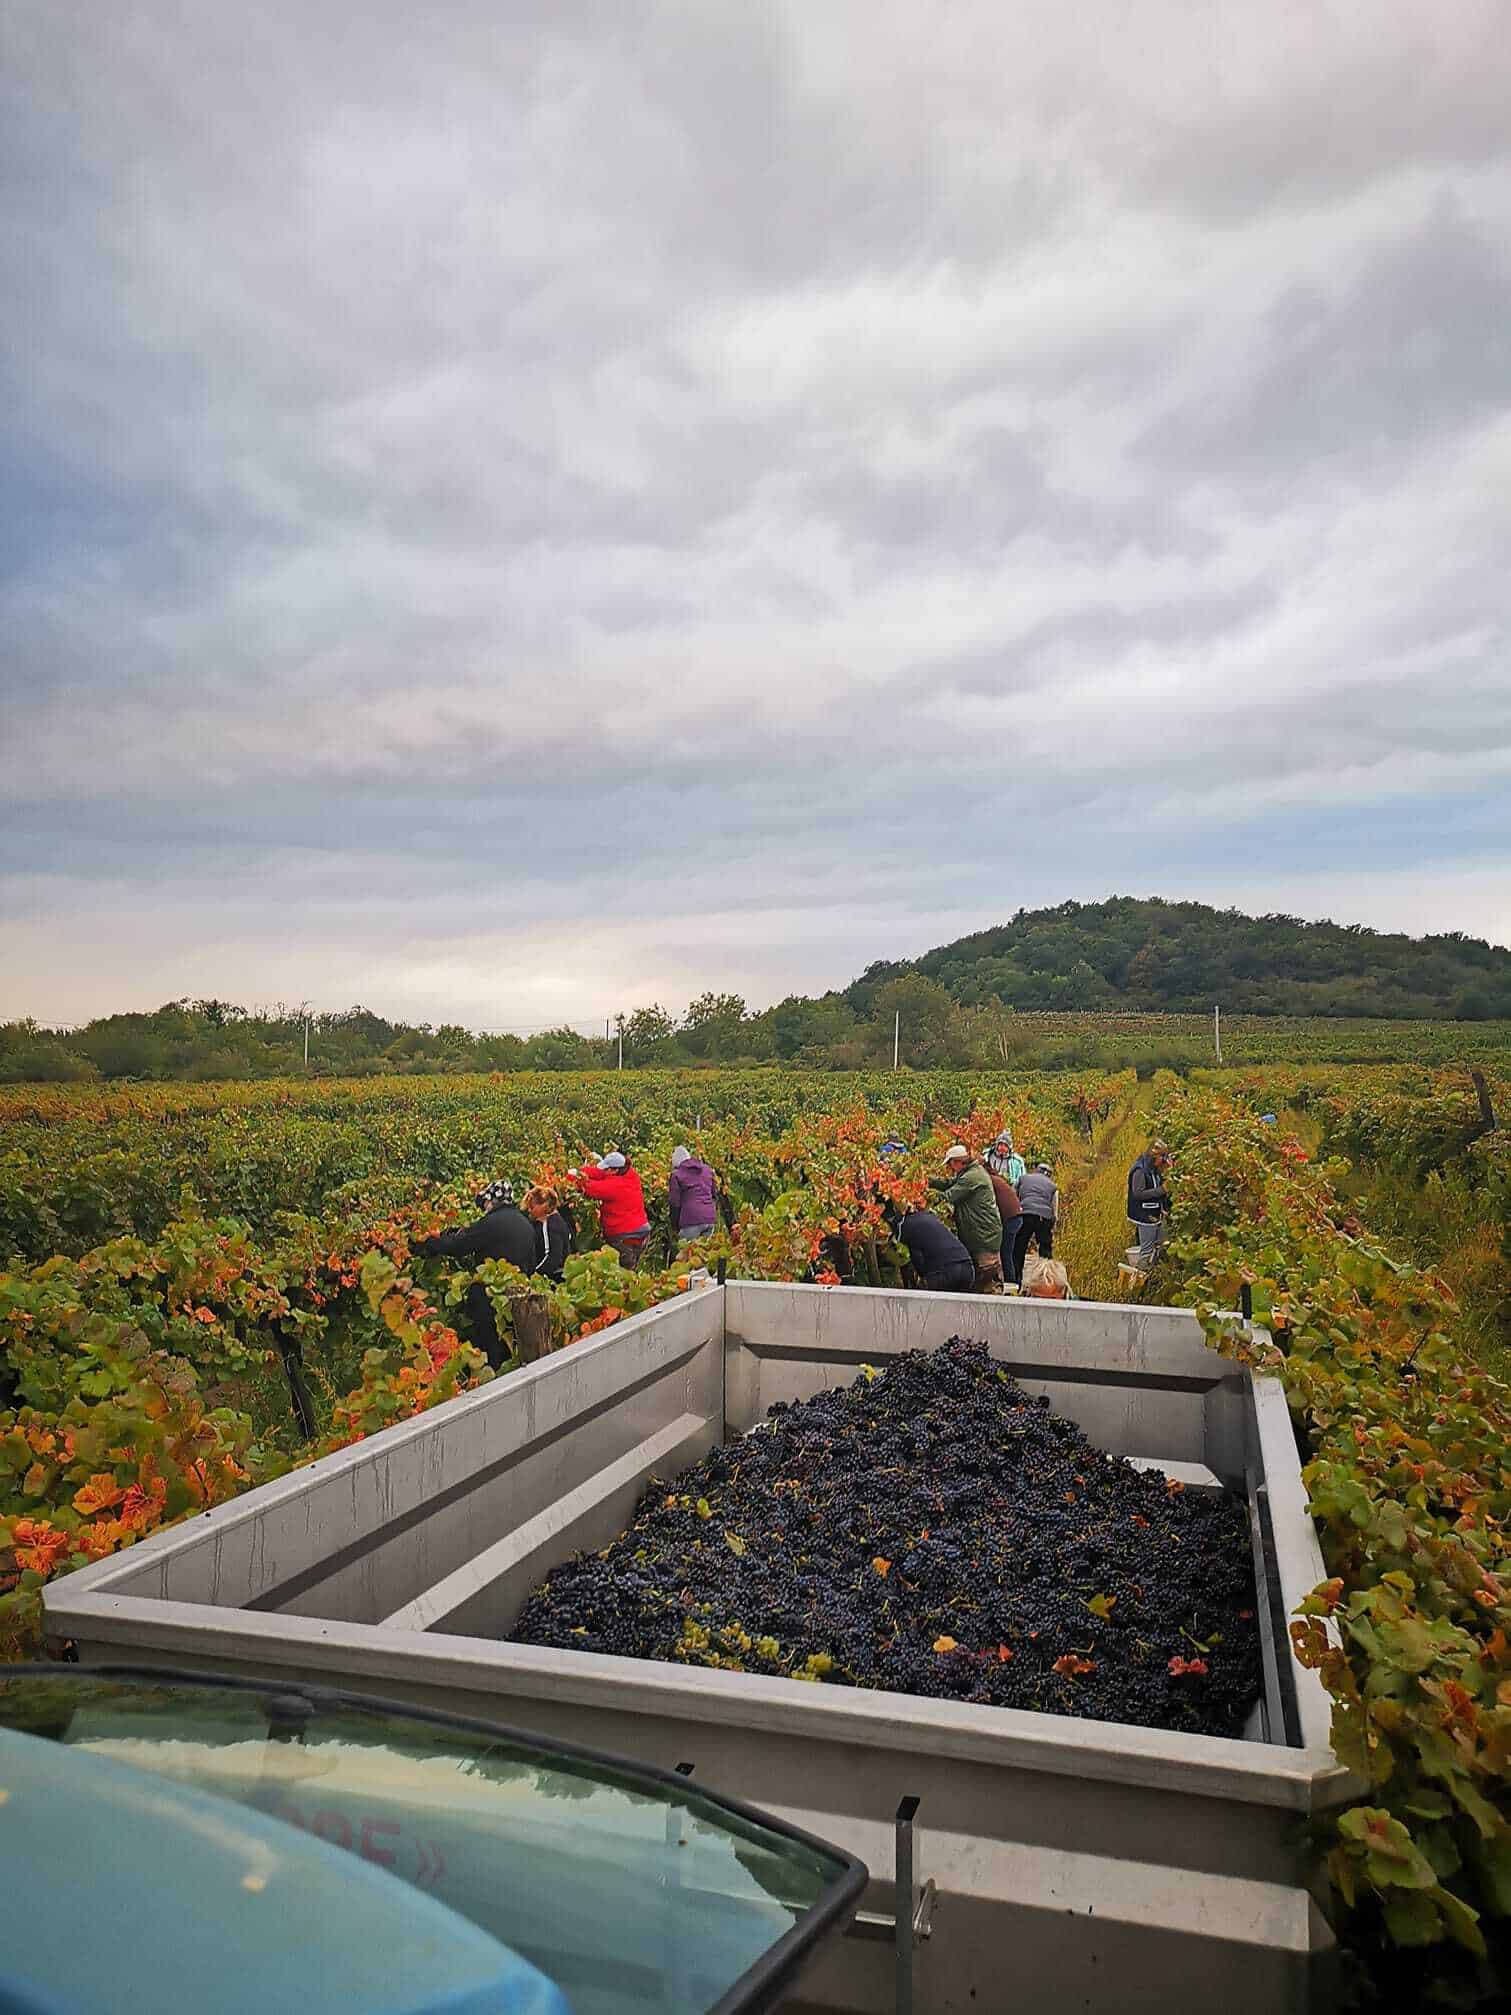 Taschner Winery and Sparkling Wine House, Sopron Kurt Taschner, the owner of the winery is famous for his beautiful photos – it is worth visiting his Facebook page full of stunning pictures of sunrise above the vineyards and Neusiedler See. Here pickers are harvesting Pinot Noir.